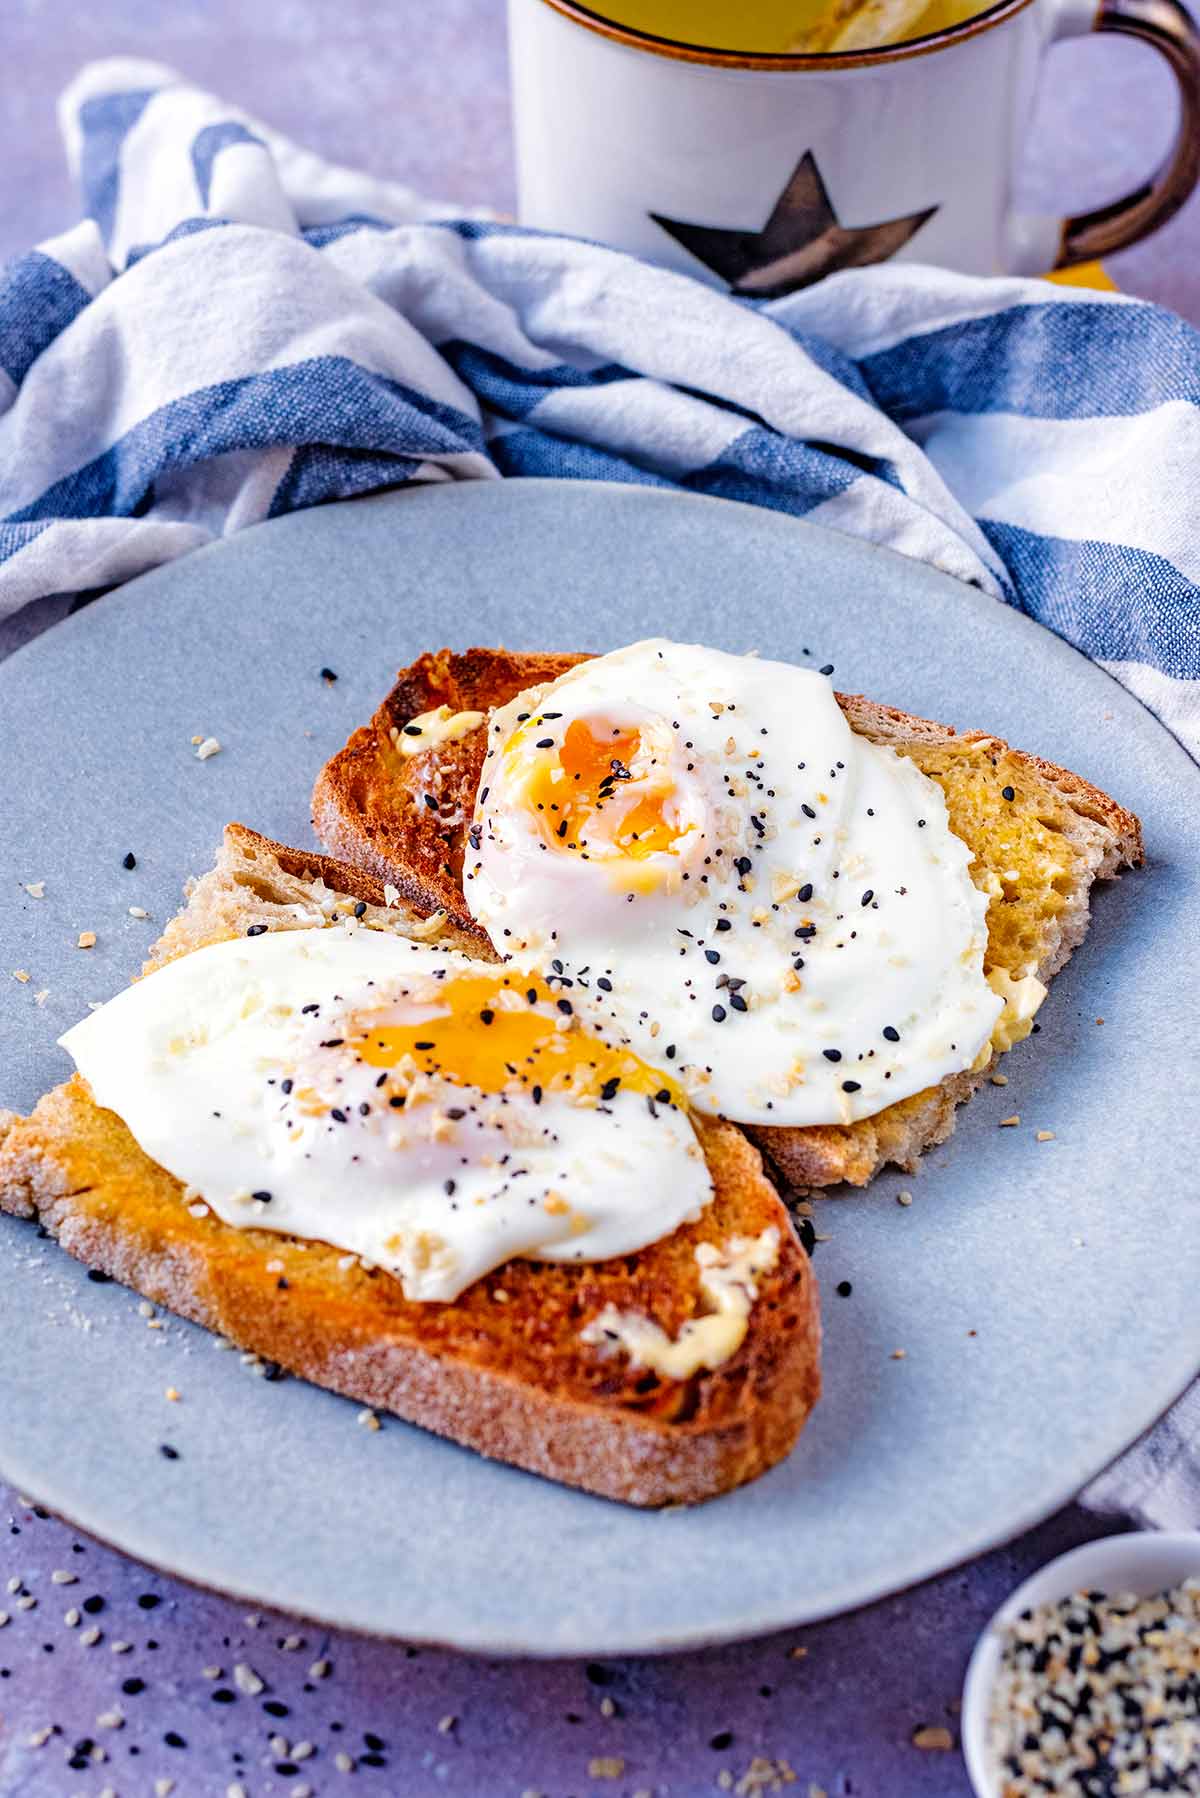 Two fried eggs on toast in front of a mug of tea.